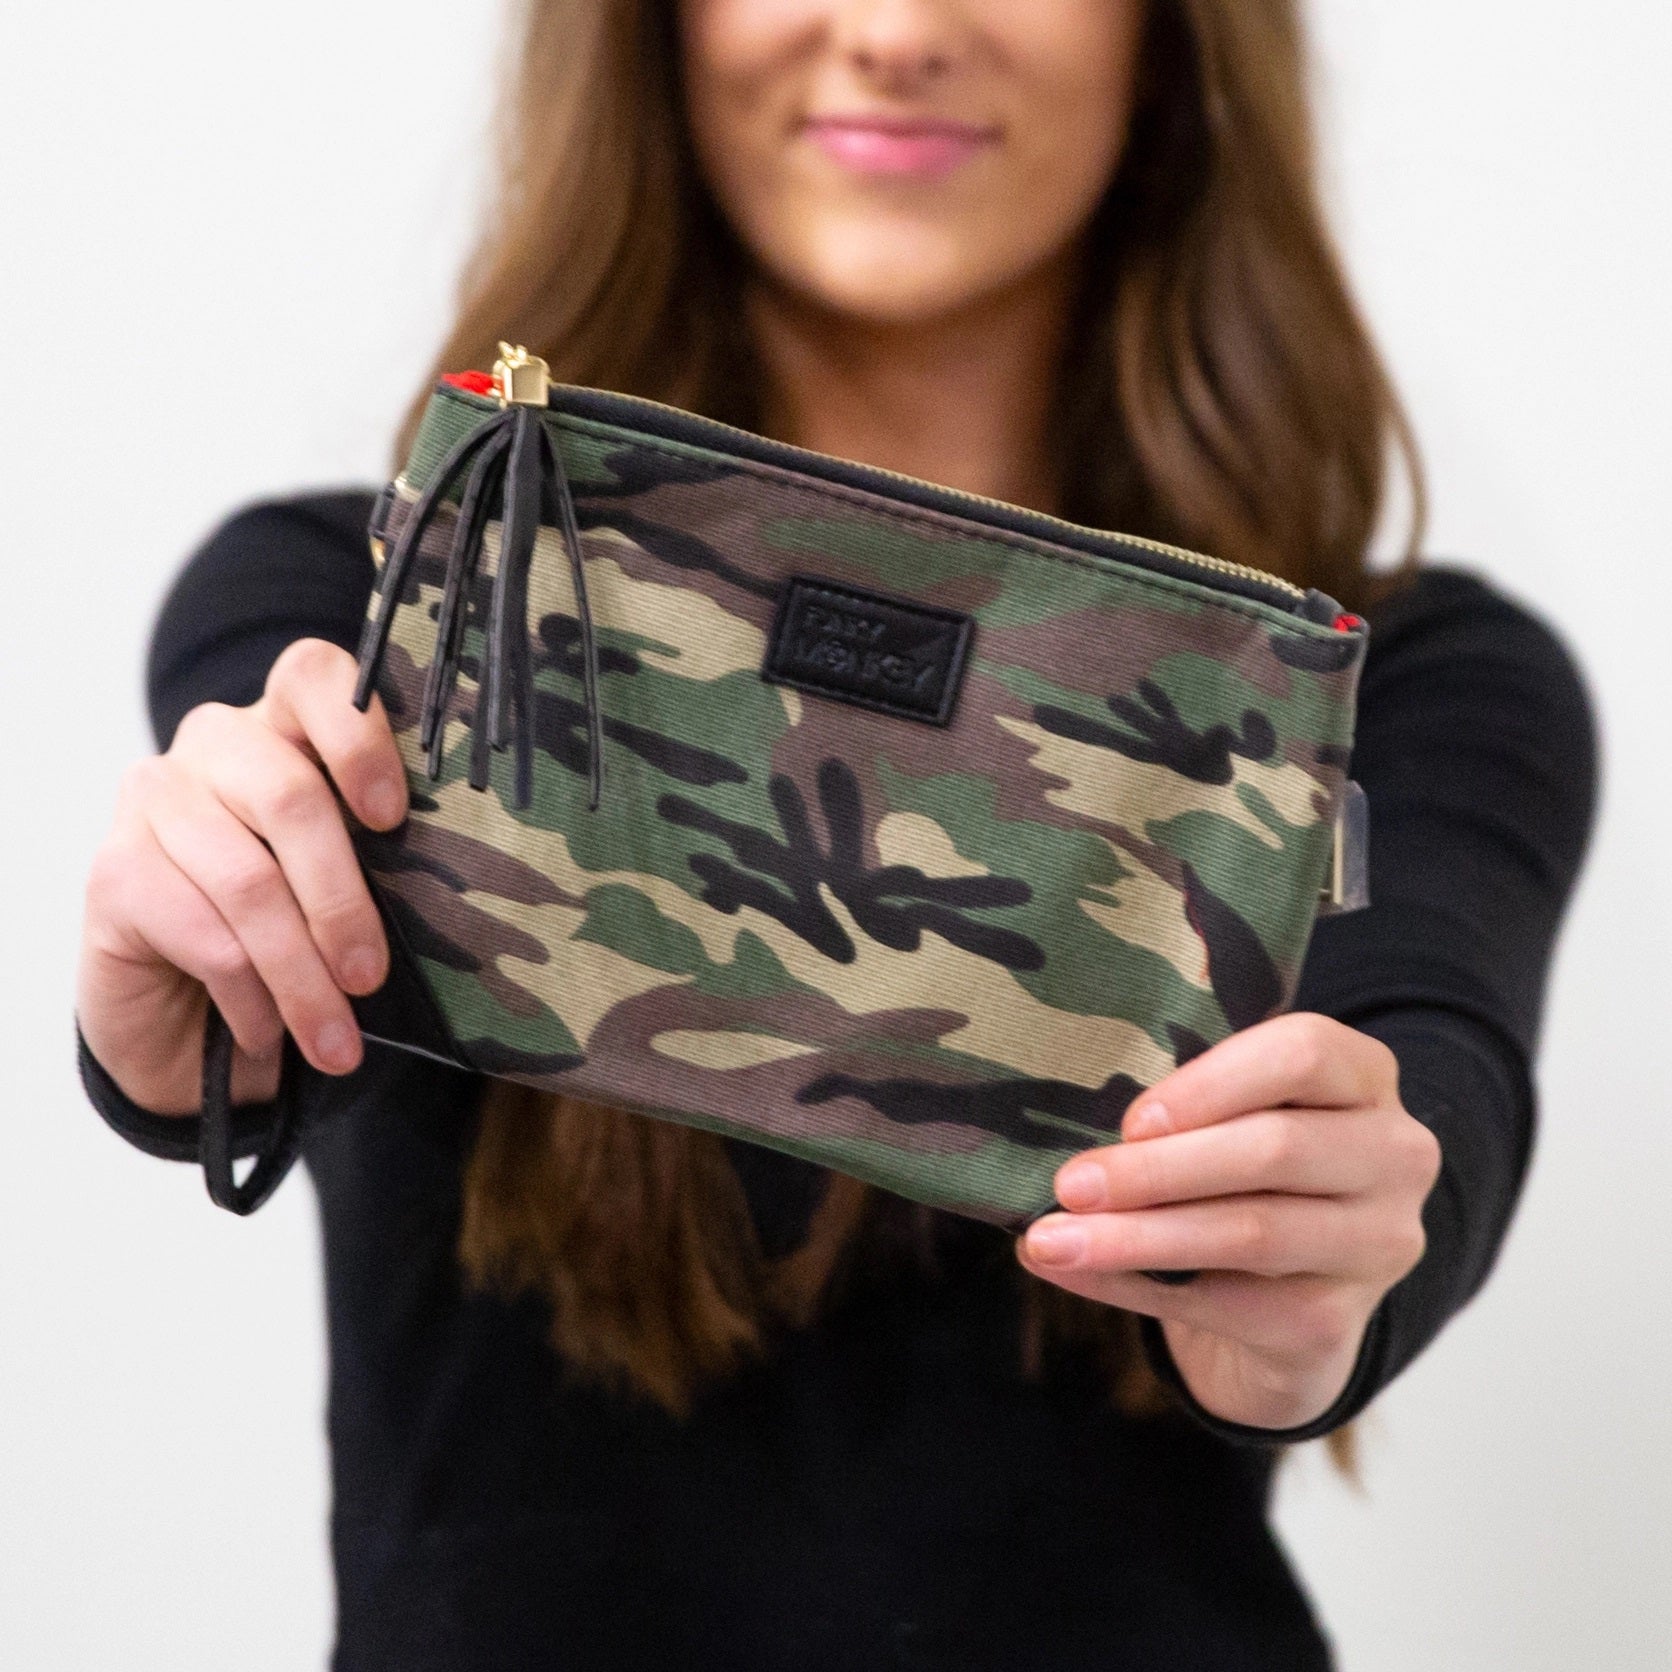 Charter Crossbody With Hybrid Pouch With Camo Print | COACH in 2023 |  Fashion pouch, Leather, Camo print